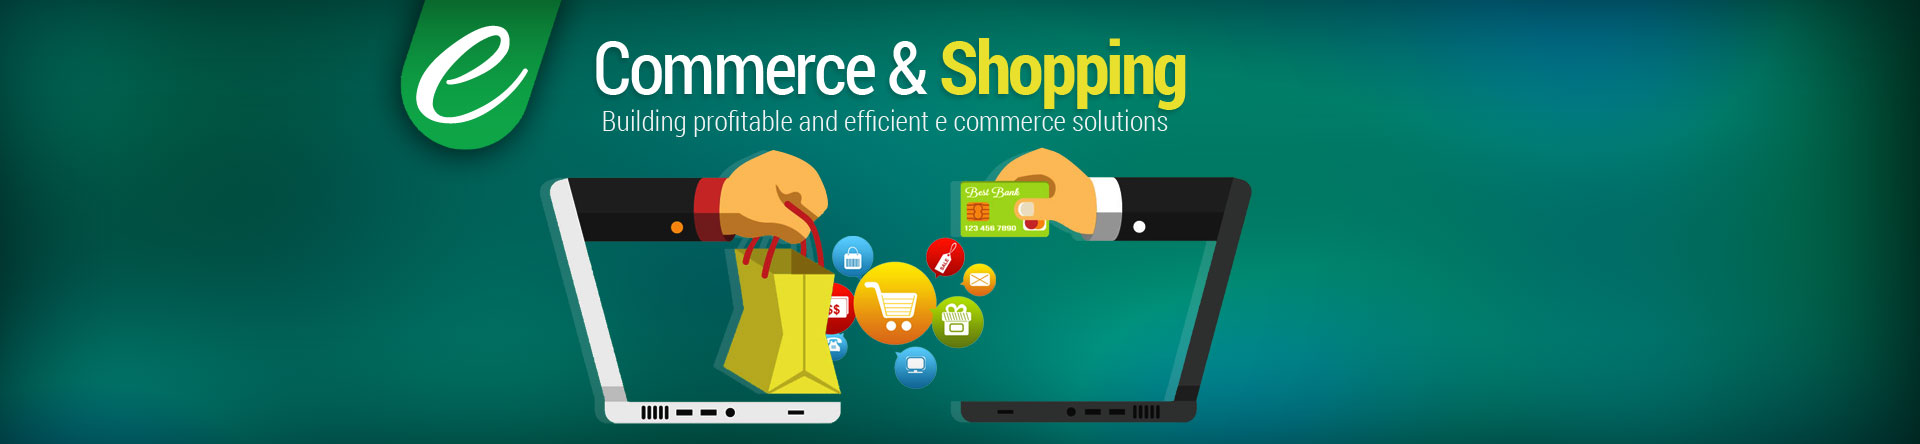 ecommerce-and-shopping